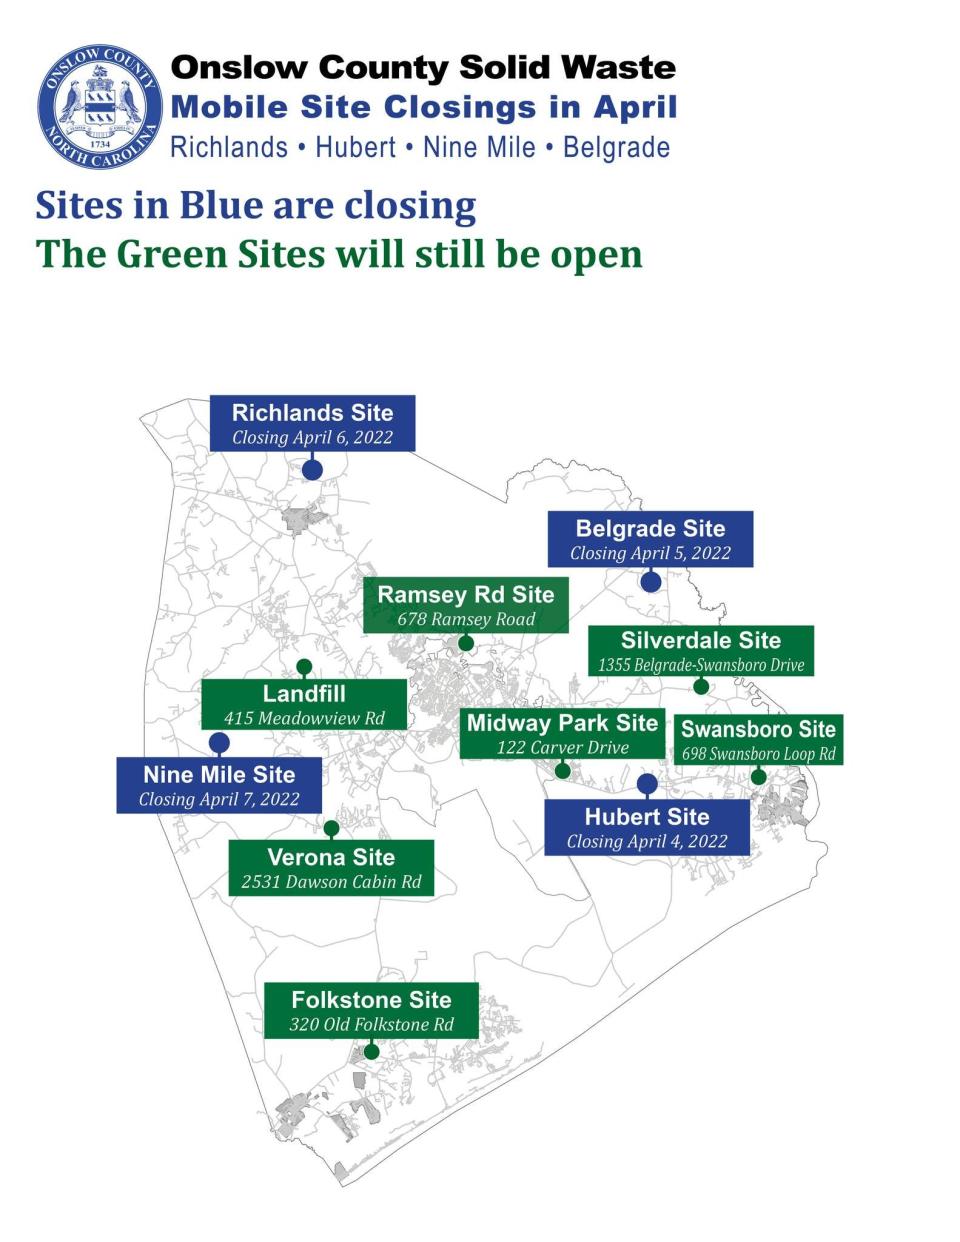 The sites in blue are closing.